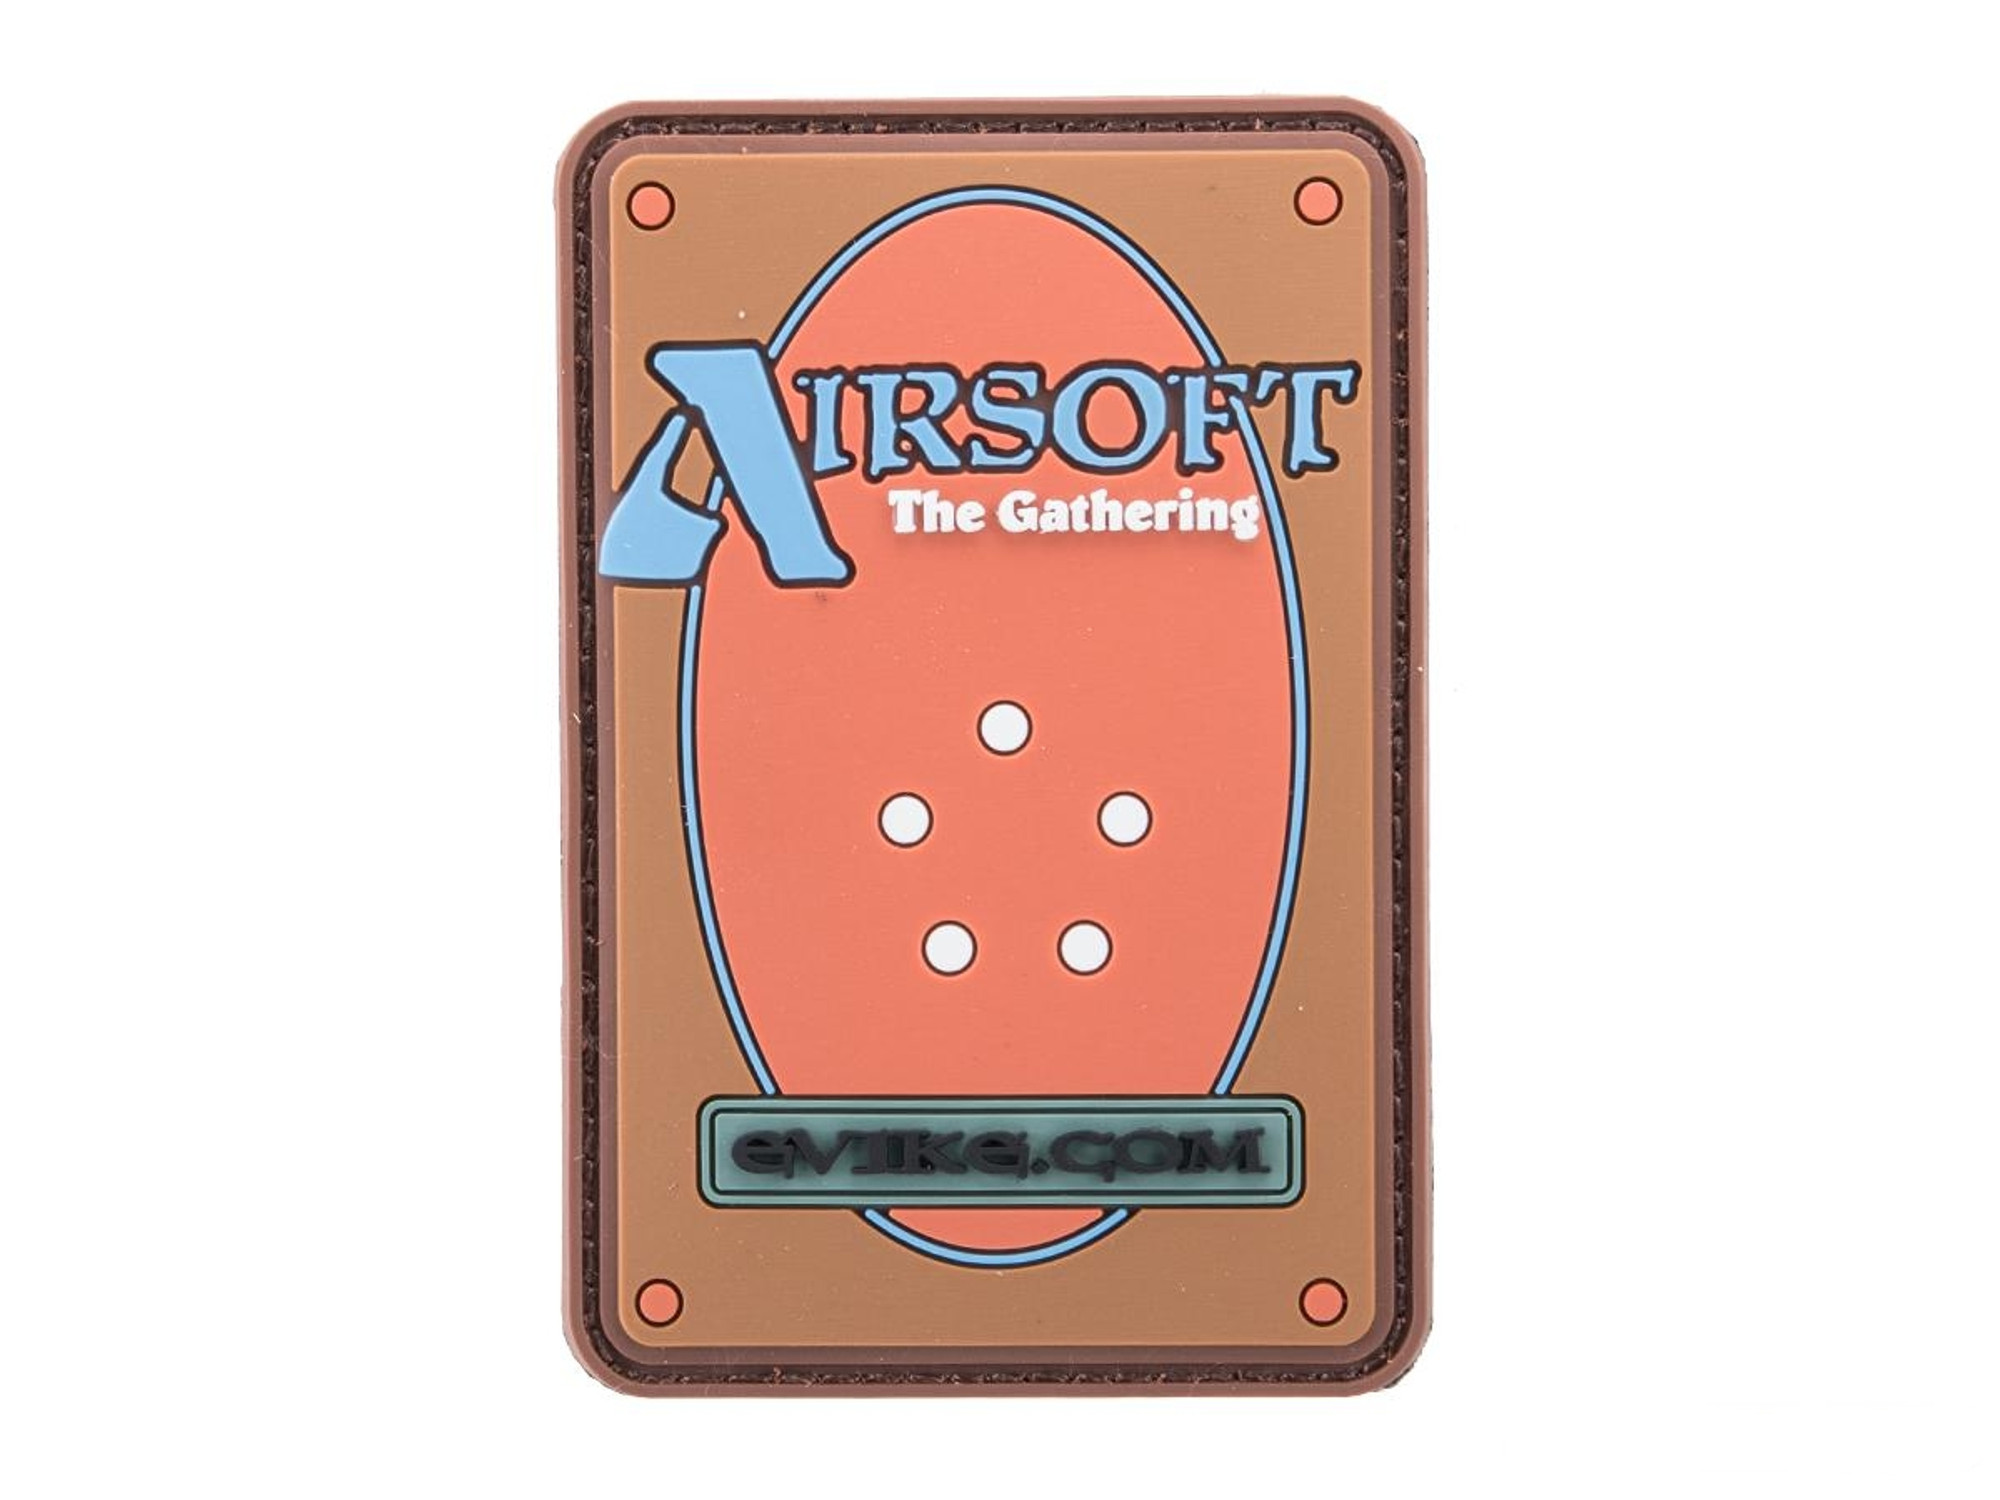 "Airsoft the Gathering" PVC Morale Patch